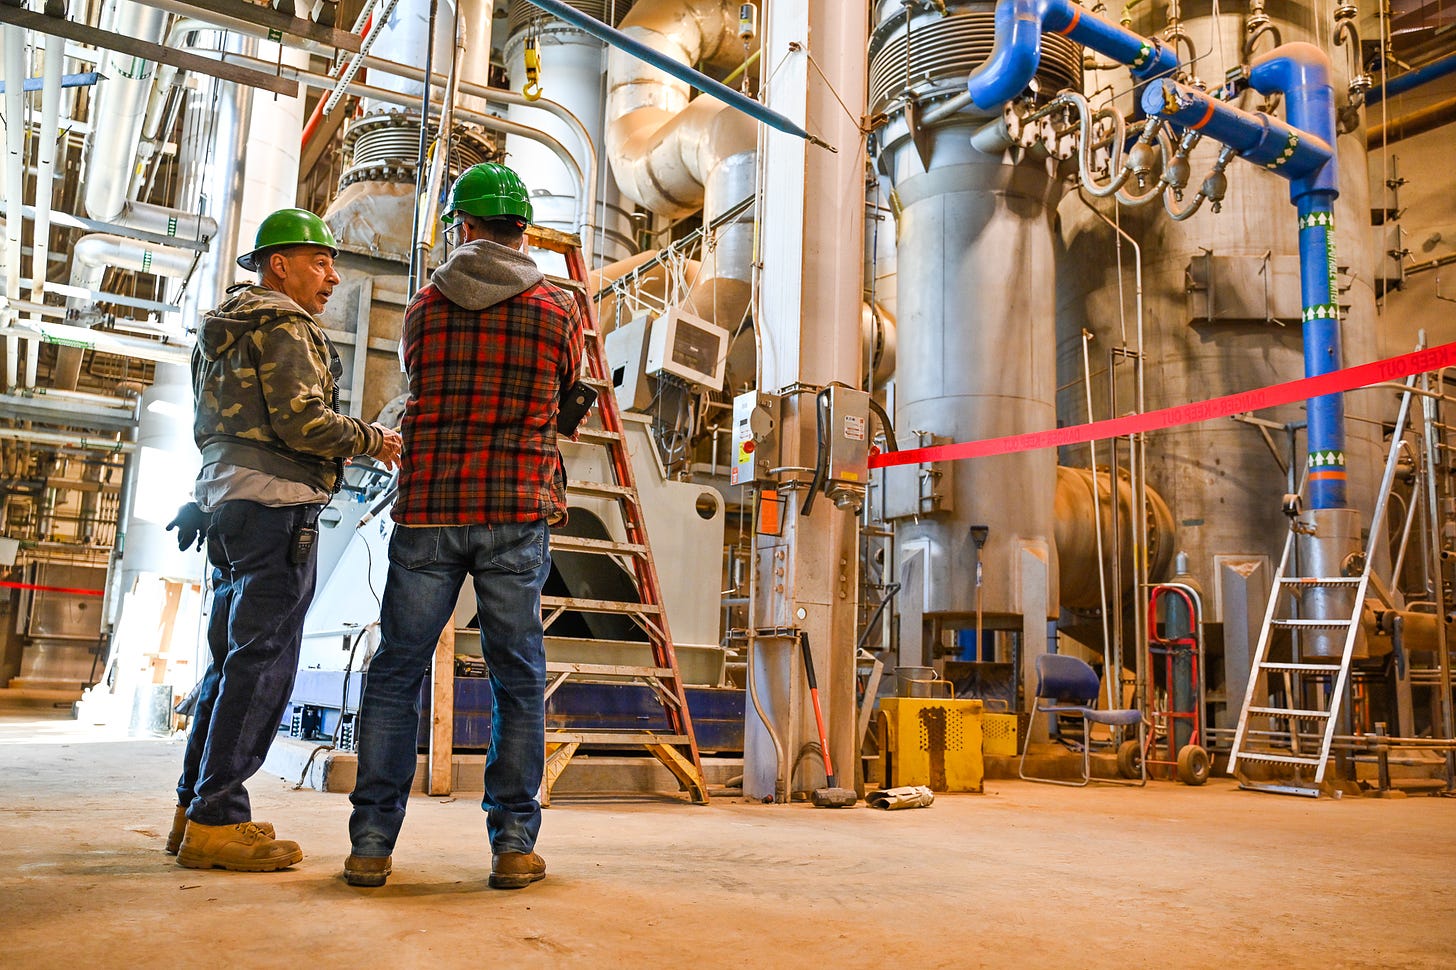 two men in green hard hats stand looking at a maze of pipes, elbows, and connections inside a wastewater treatment plant. the photographer stands behind them and captures them in mid conversation, the man on the left pointing to the equipment as he talks to the man on the right.